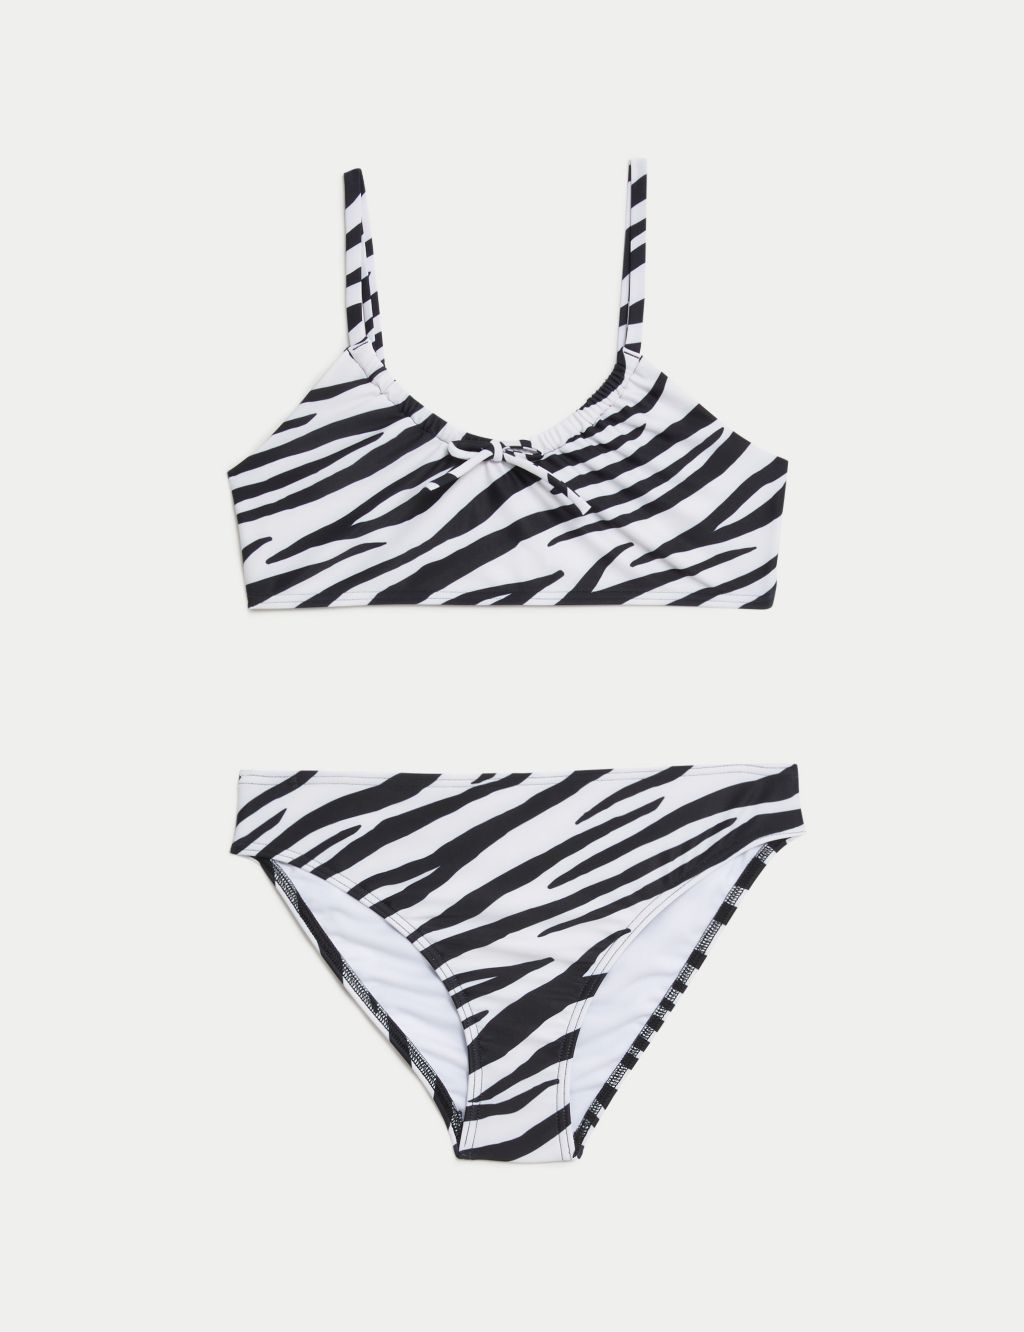  Chance Loves Black and White Two Piece Bikini Swimsuit for  Girls Size 8Years : Clothing, Shoes & Jewelry